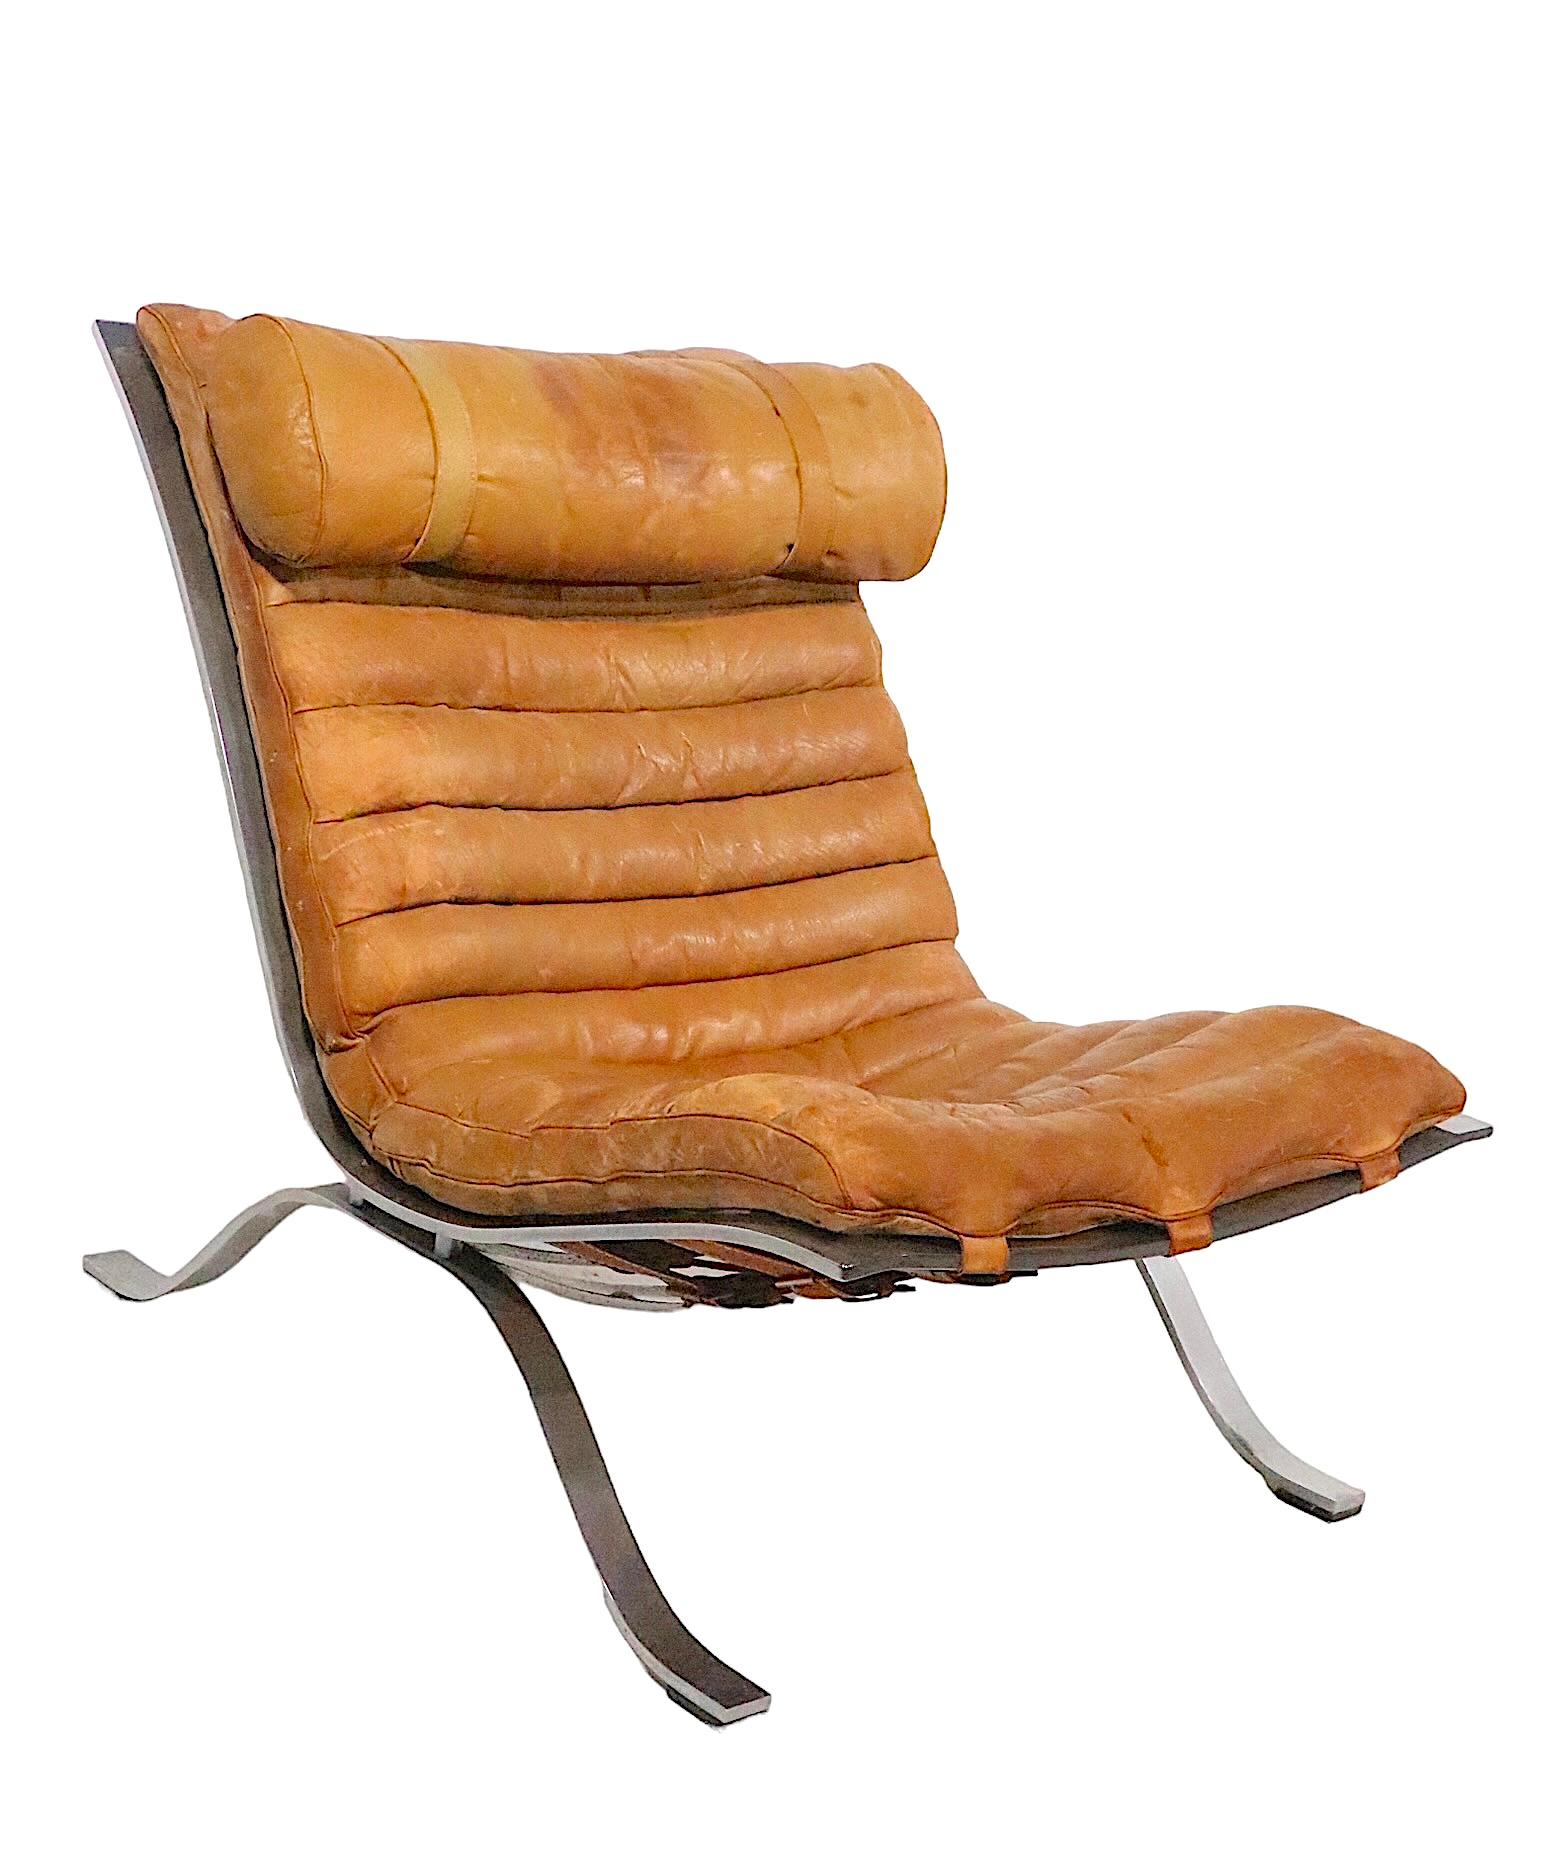 Swedish Pr. Ari Lounge Chairs with Ottomans by Arne Norell Made in Sweden c. 1960's For Sale